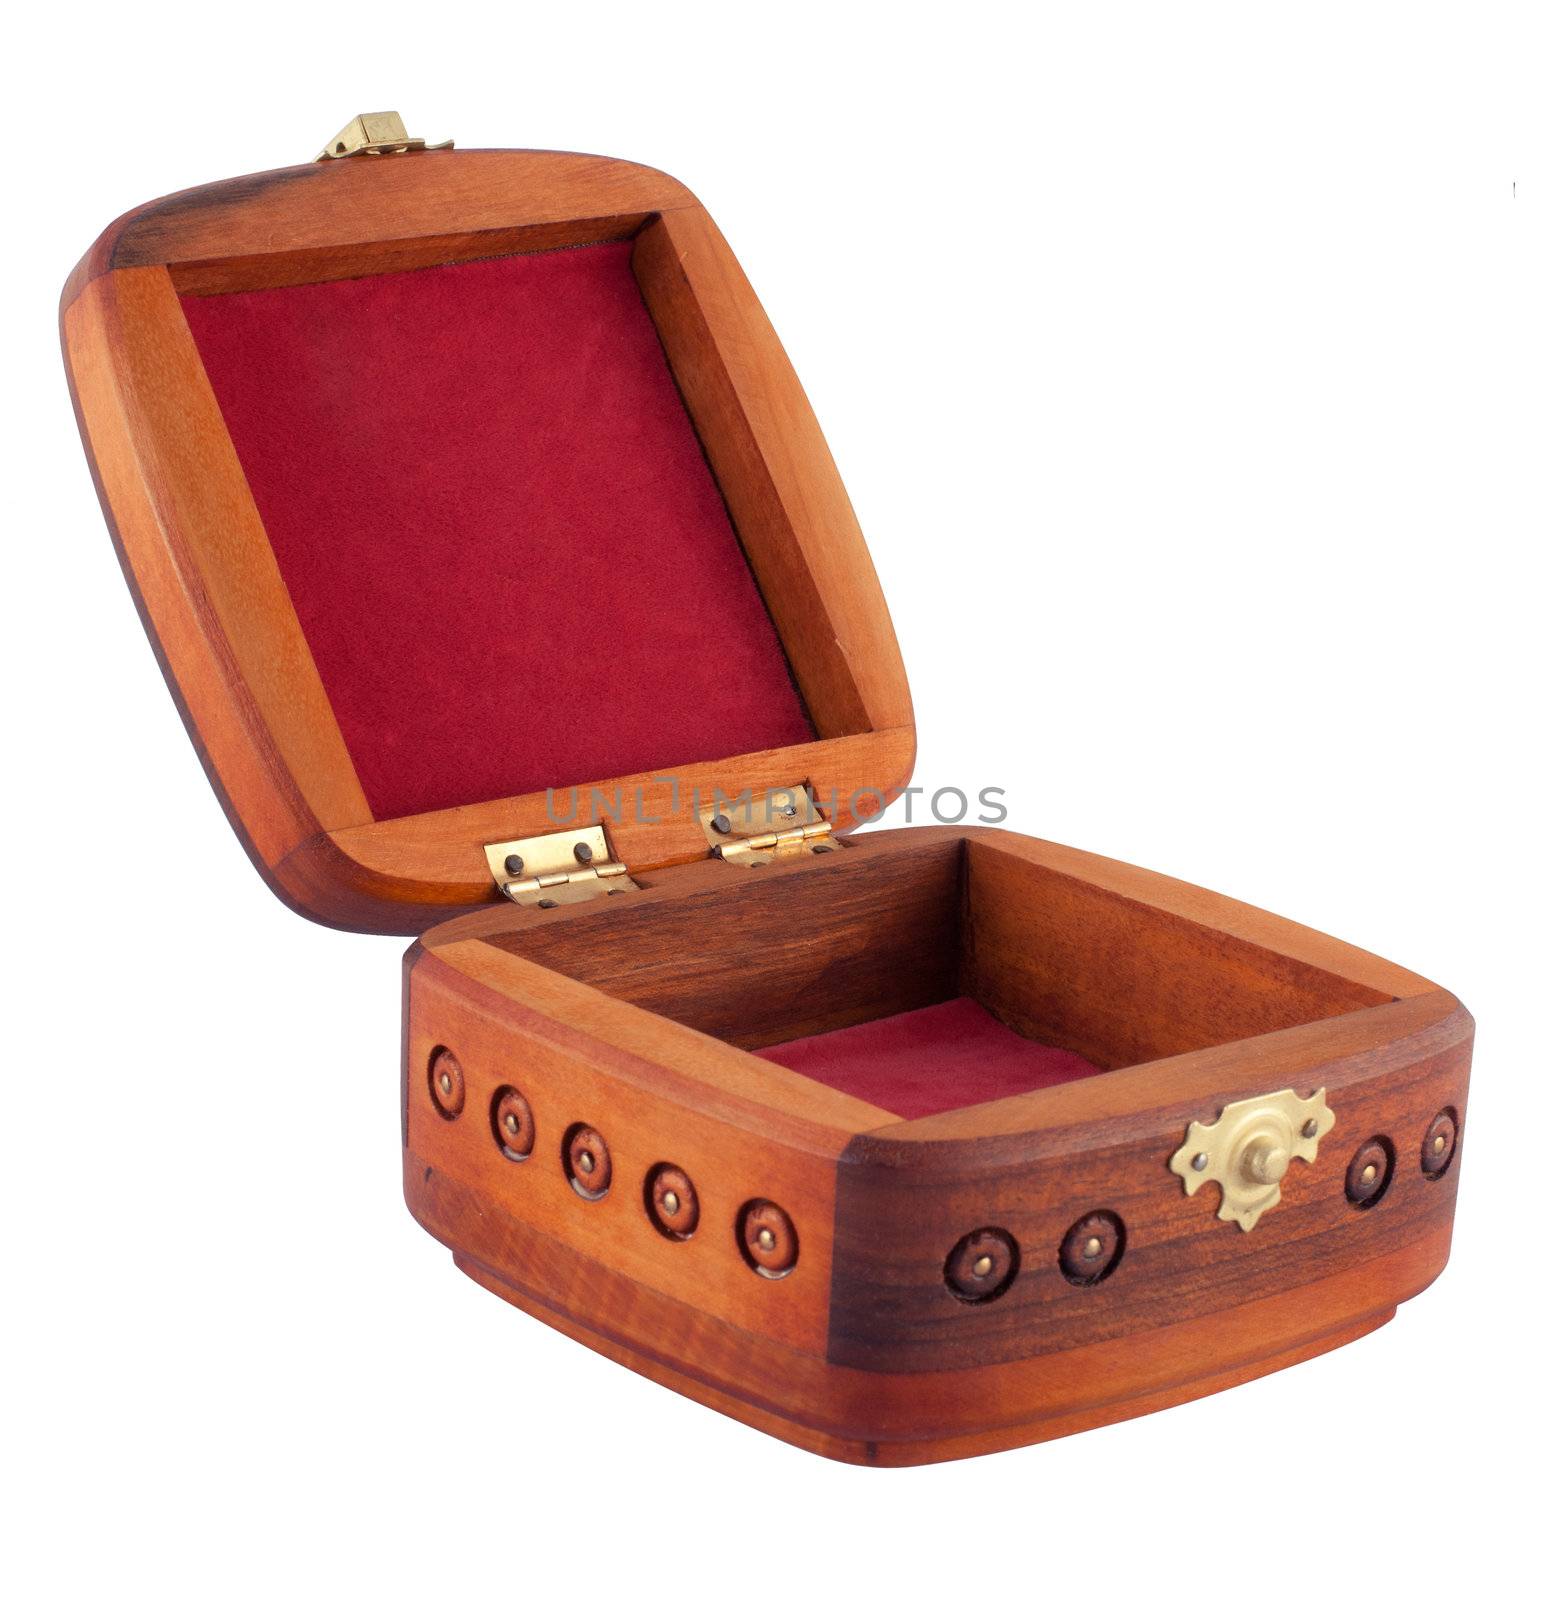 Opened wooden casket whis patterns by nvelichko